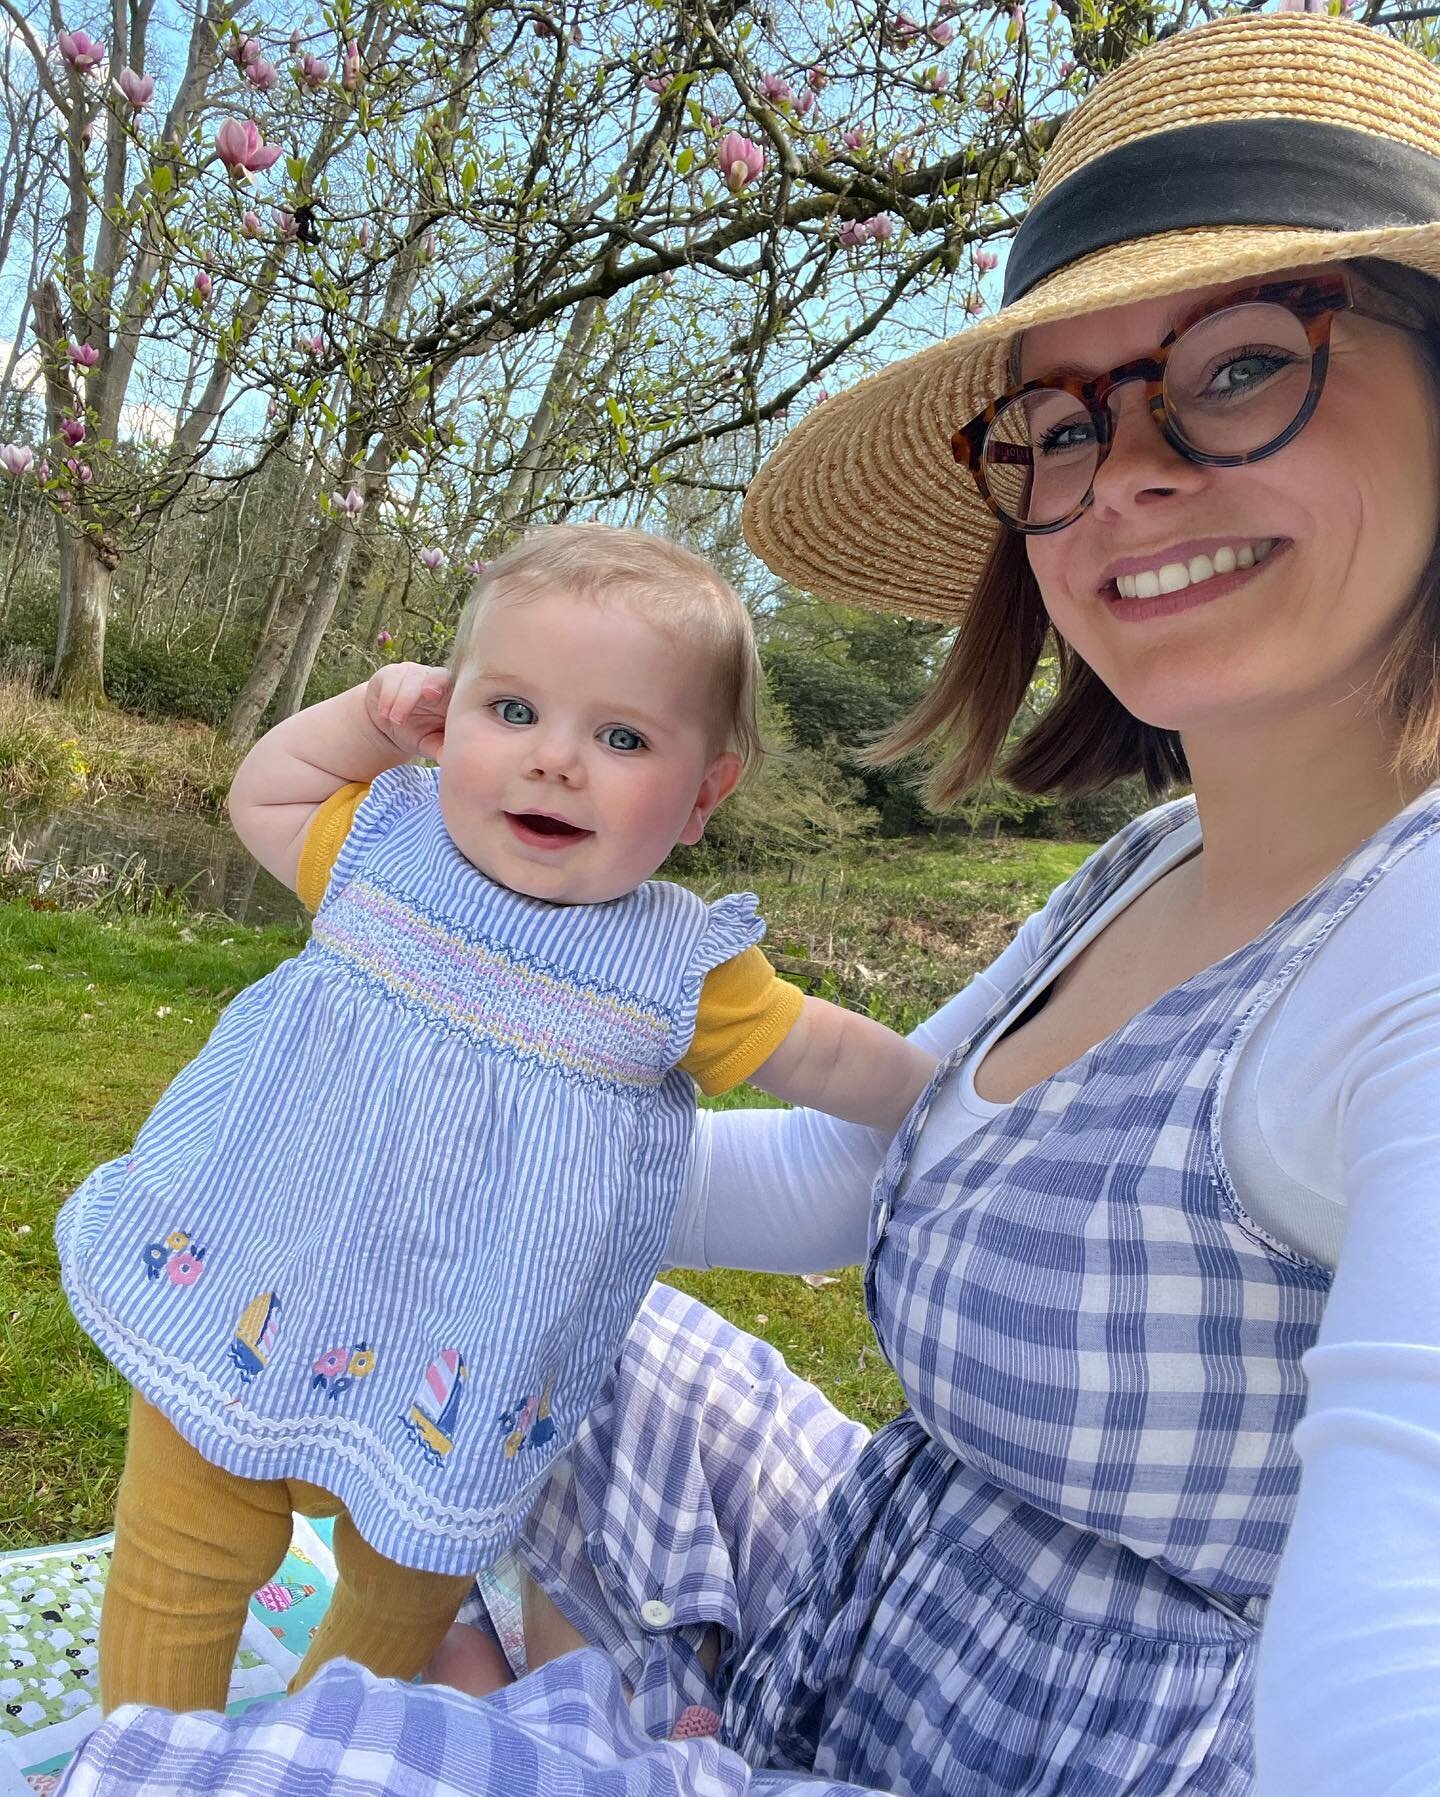 Today&rsquo;s first picnic of the year felt like a good time to dust off this trusty old friend &ndash; bought at Walthamstow&rsquo;s flea market last year and rarely off my back when pregnant (so much so I wore through the sleeves and had to cut &ls